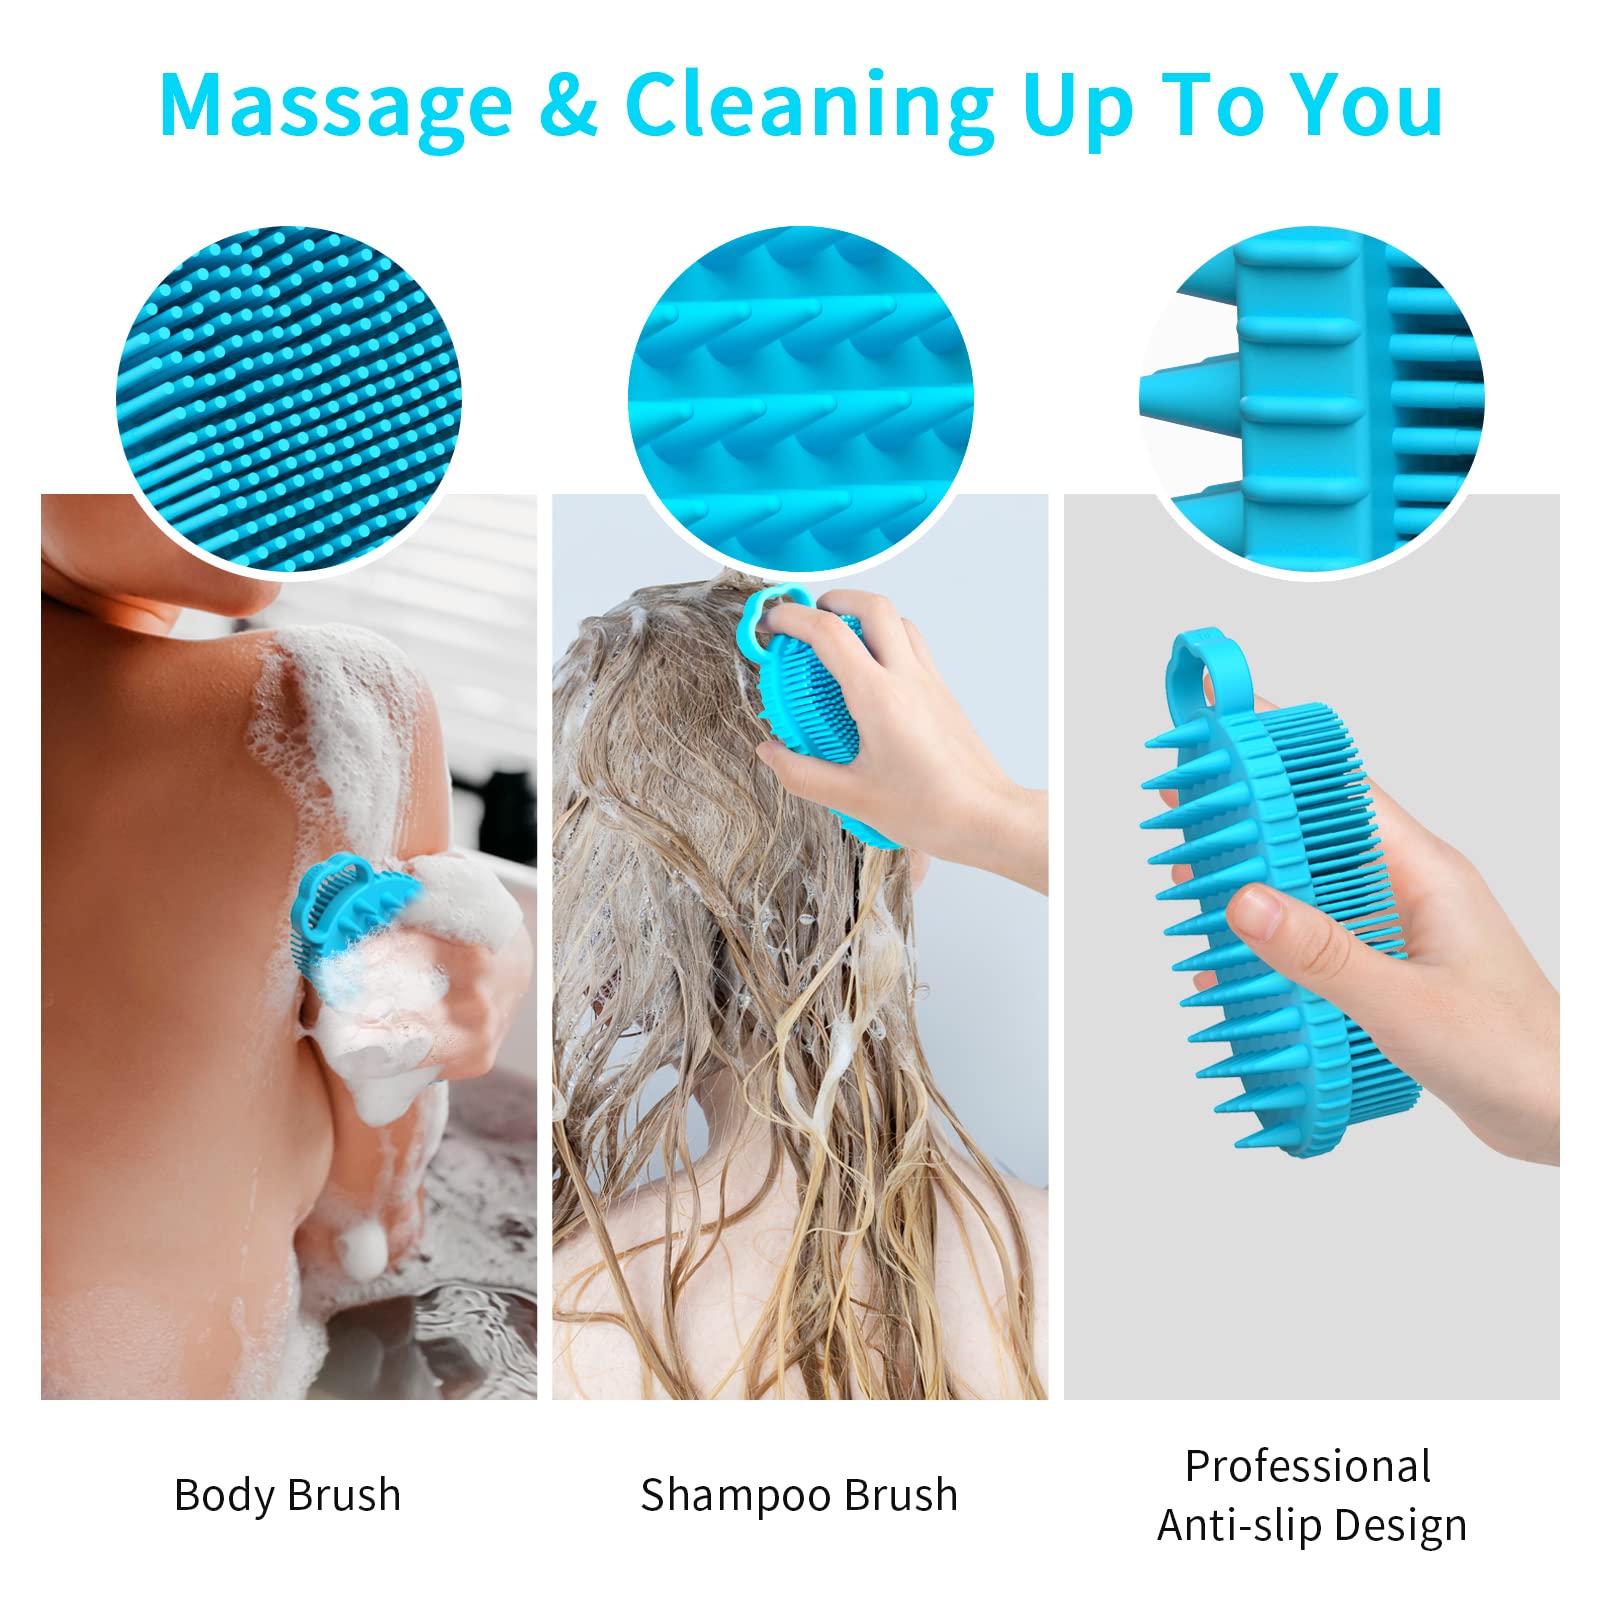 BathWe 2 Pack Silicone Body Scrubber, 2 in 1 Shower and Shampoo Scalp Massager Brush for Dry and Wet, Men Women Bath Exfoliate Accessory (Large)